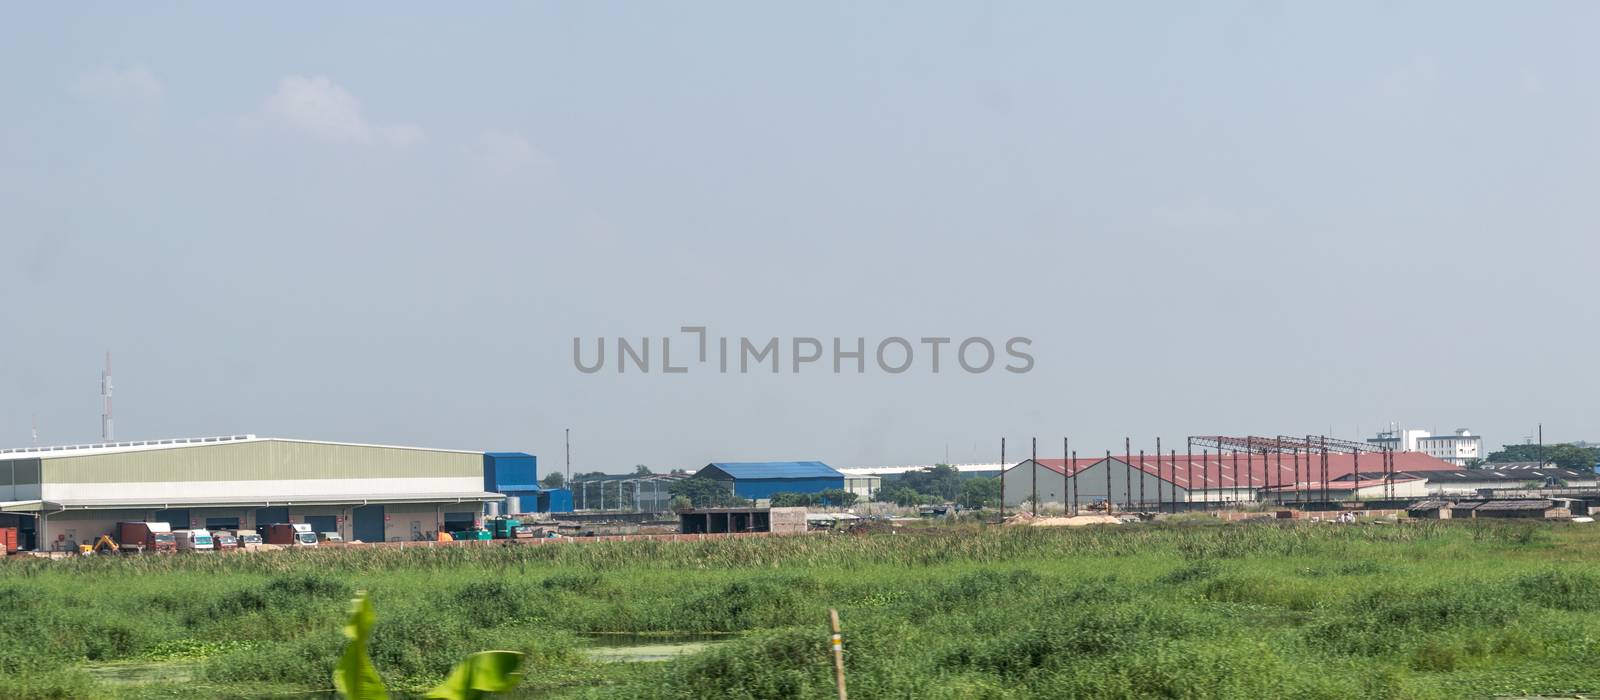 Industrial site power plant landscape. Industry surrounded by rural agricultural field and green summer meadow. A beautiful non-urban scenic environment of Rural Countryside of India, south asia pac. by sudiptabhowmick